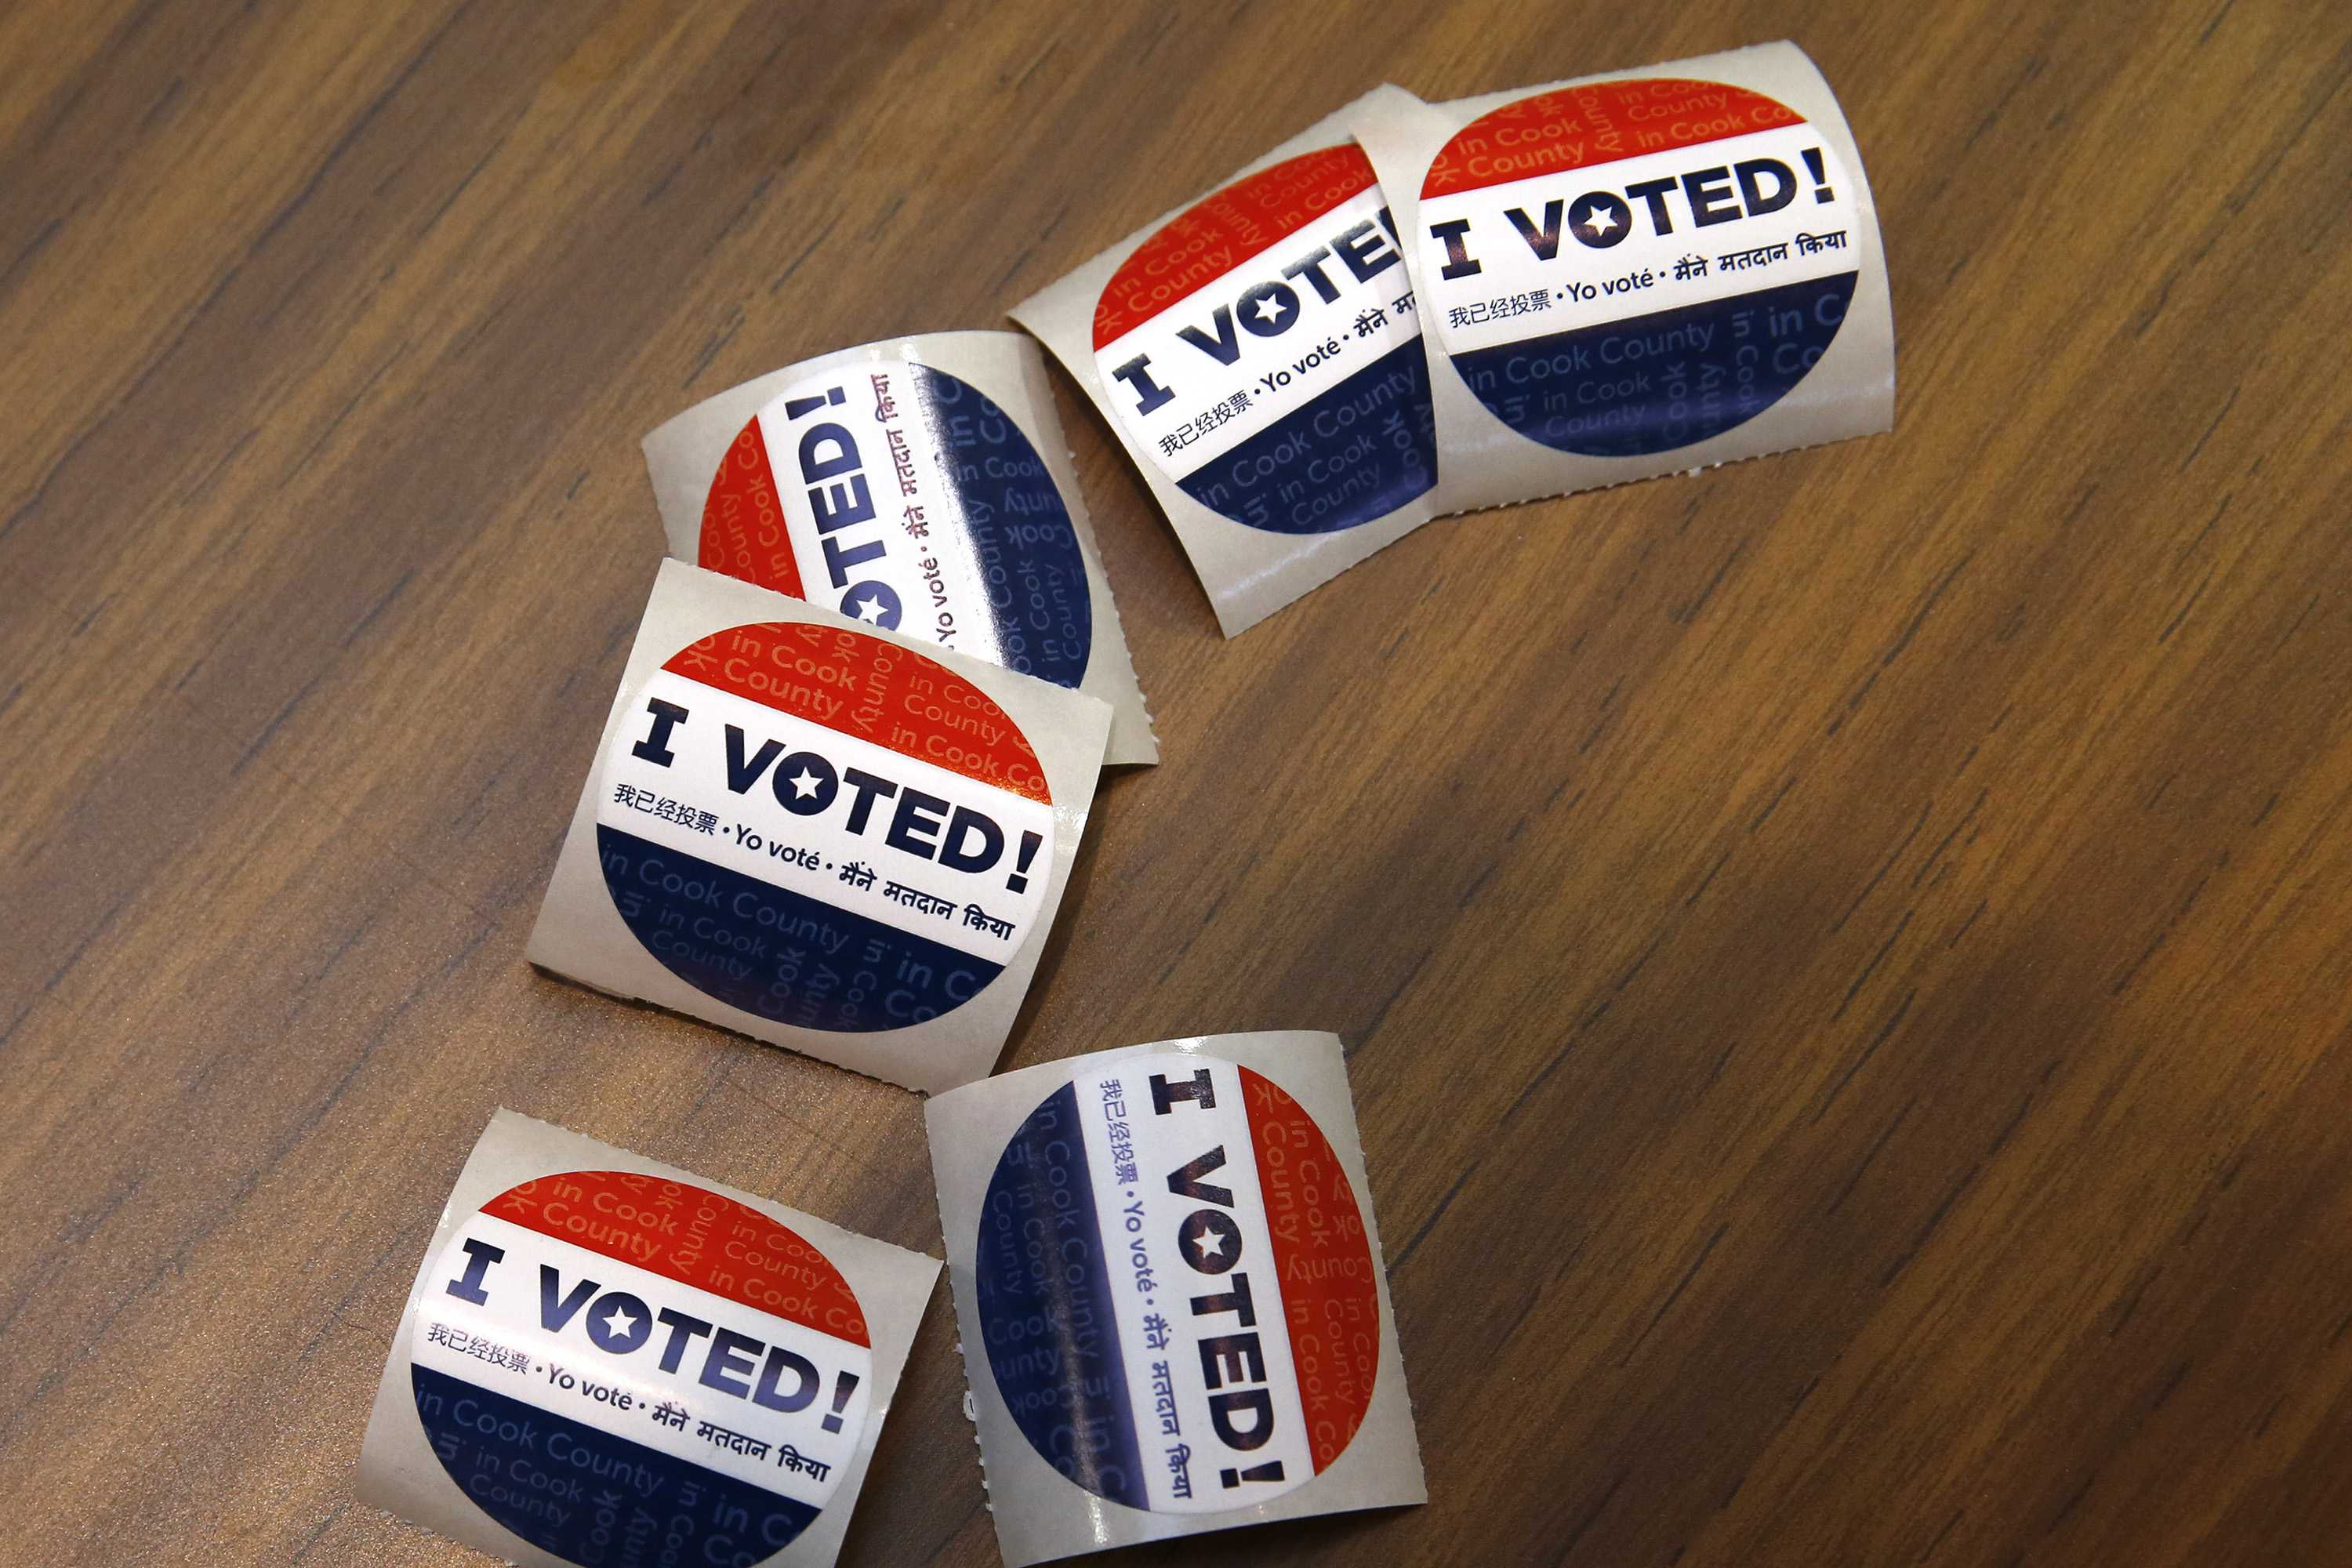 Photo shows voting stickers